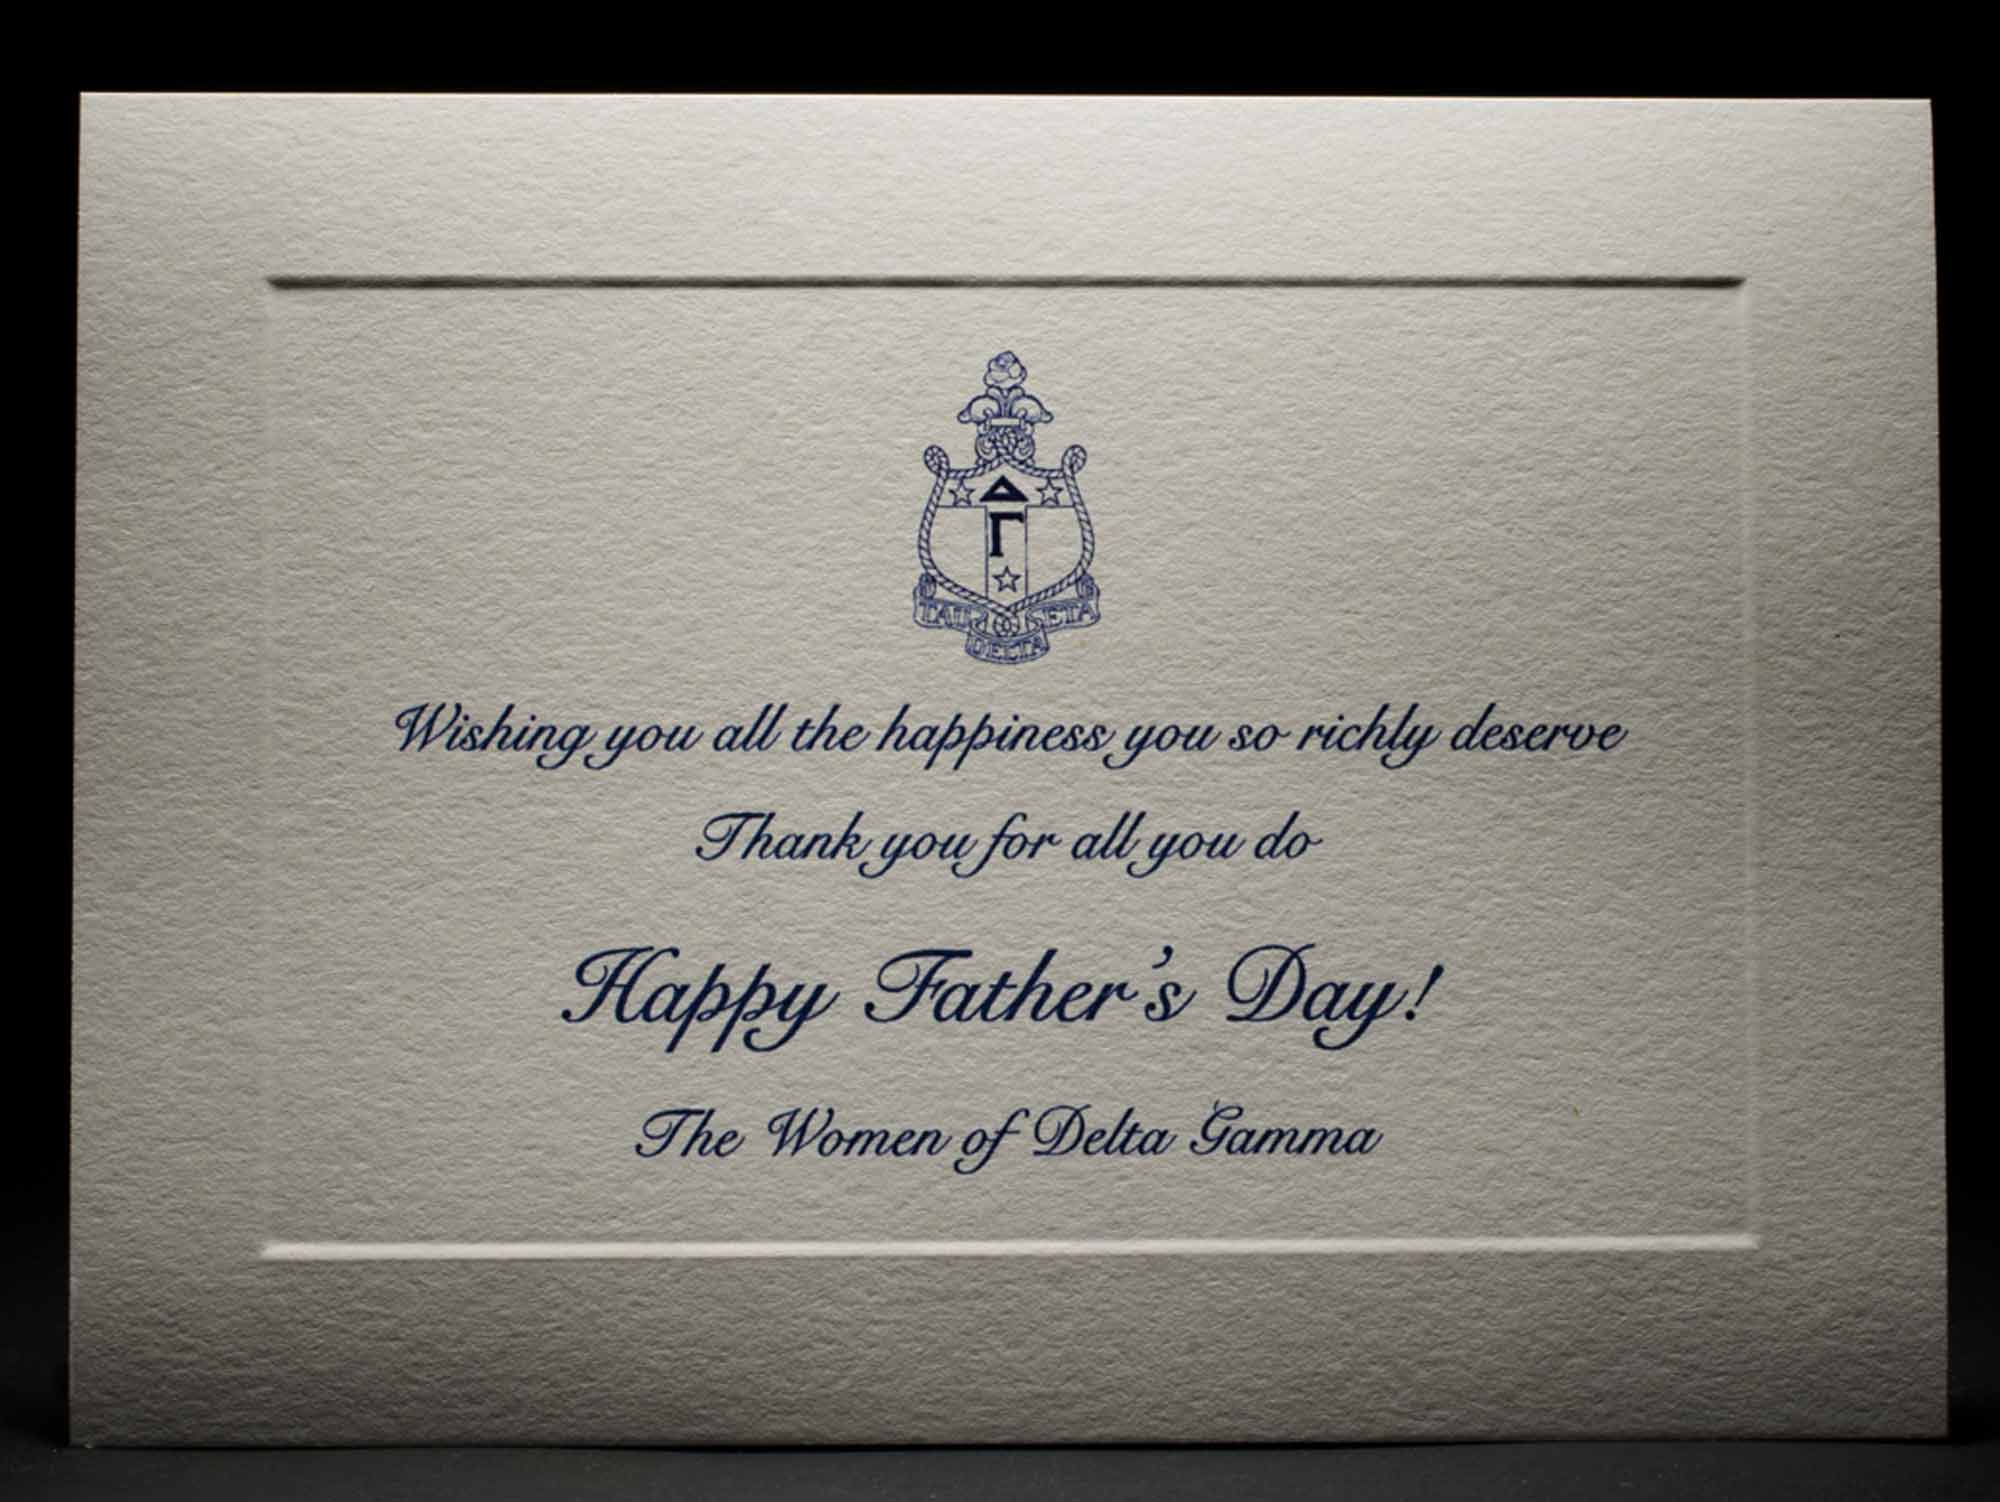 Father’s Day Cards Delta Gamma